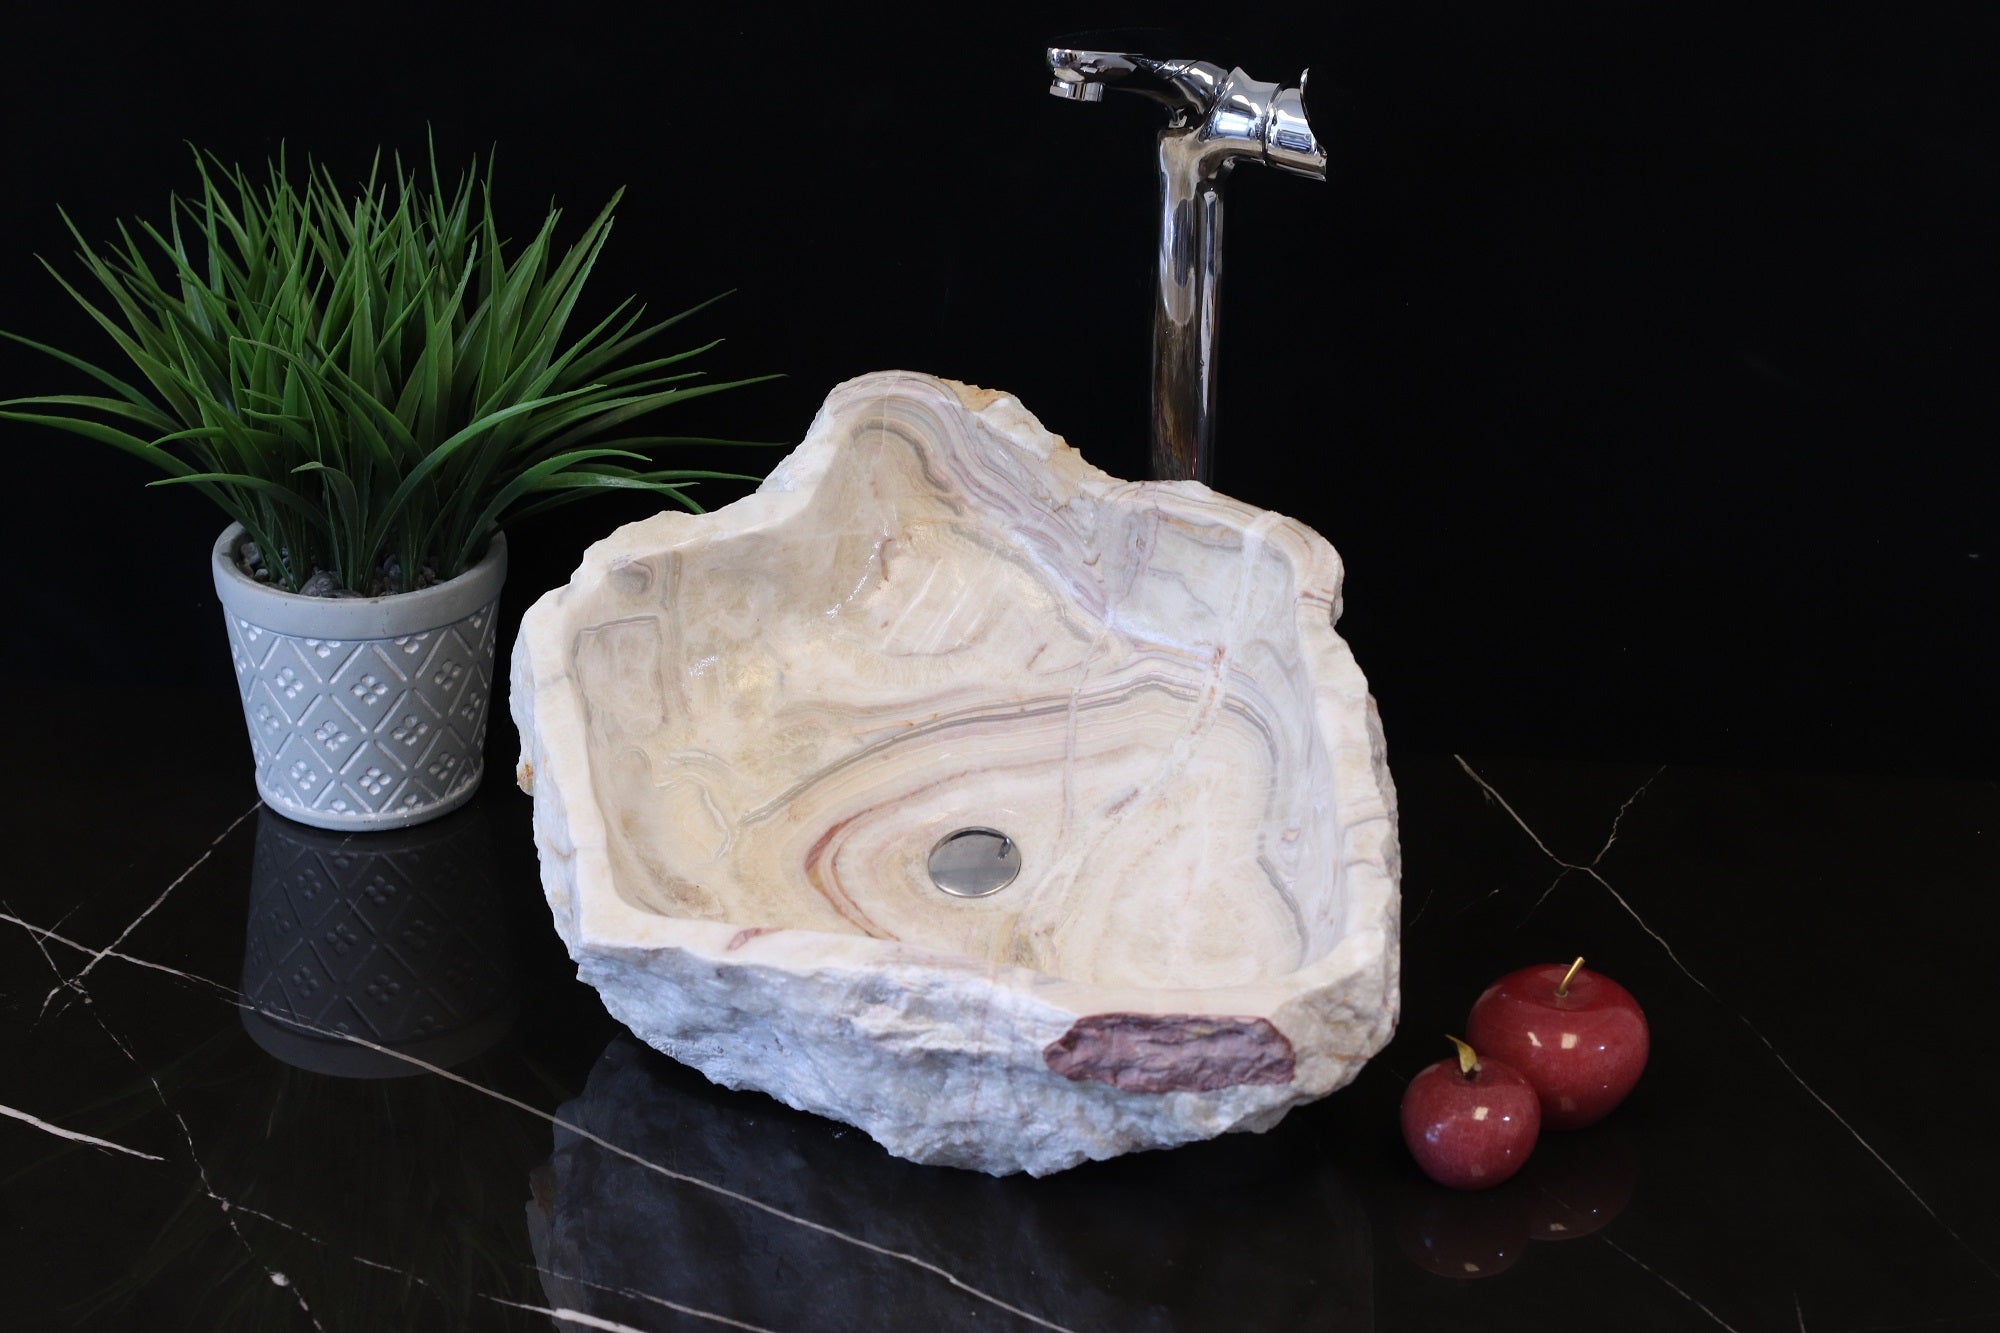 Ivory and Cream Onyx Vessel Sink. A beautiful work of art. We offer fast shipping. Handmade in Mexico. We hand finish, package, and ship from the USA. Buy now at www.felipeandgrace.com. 